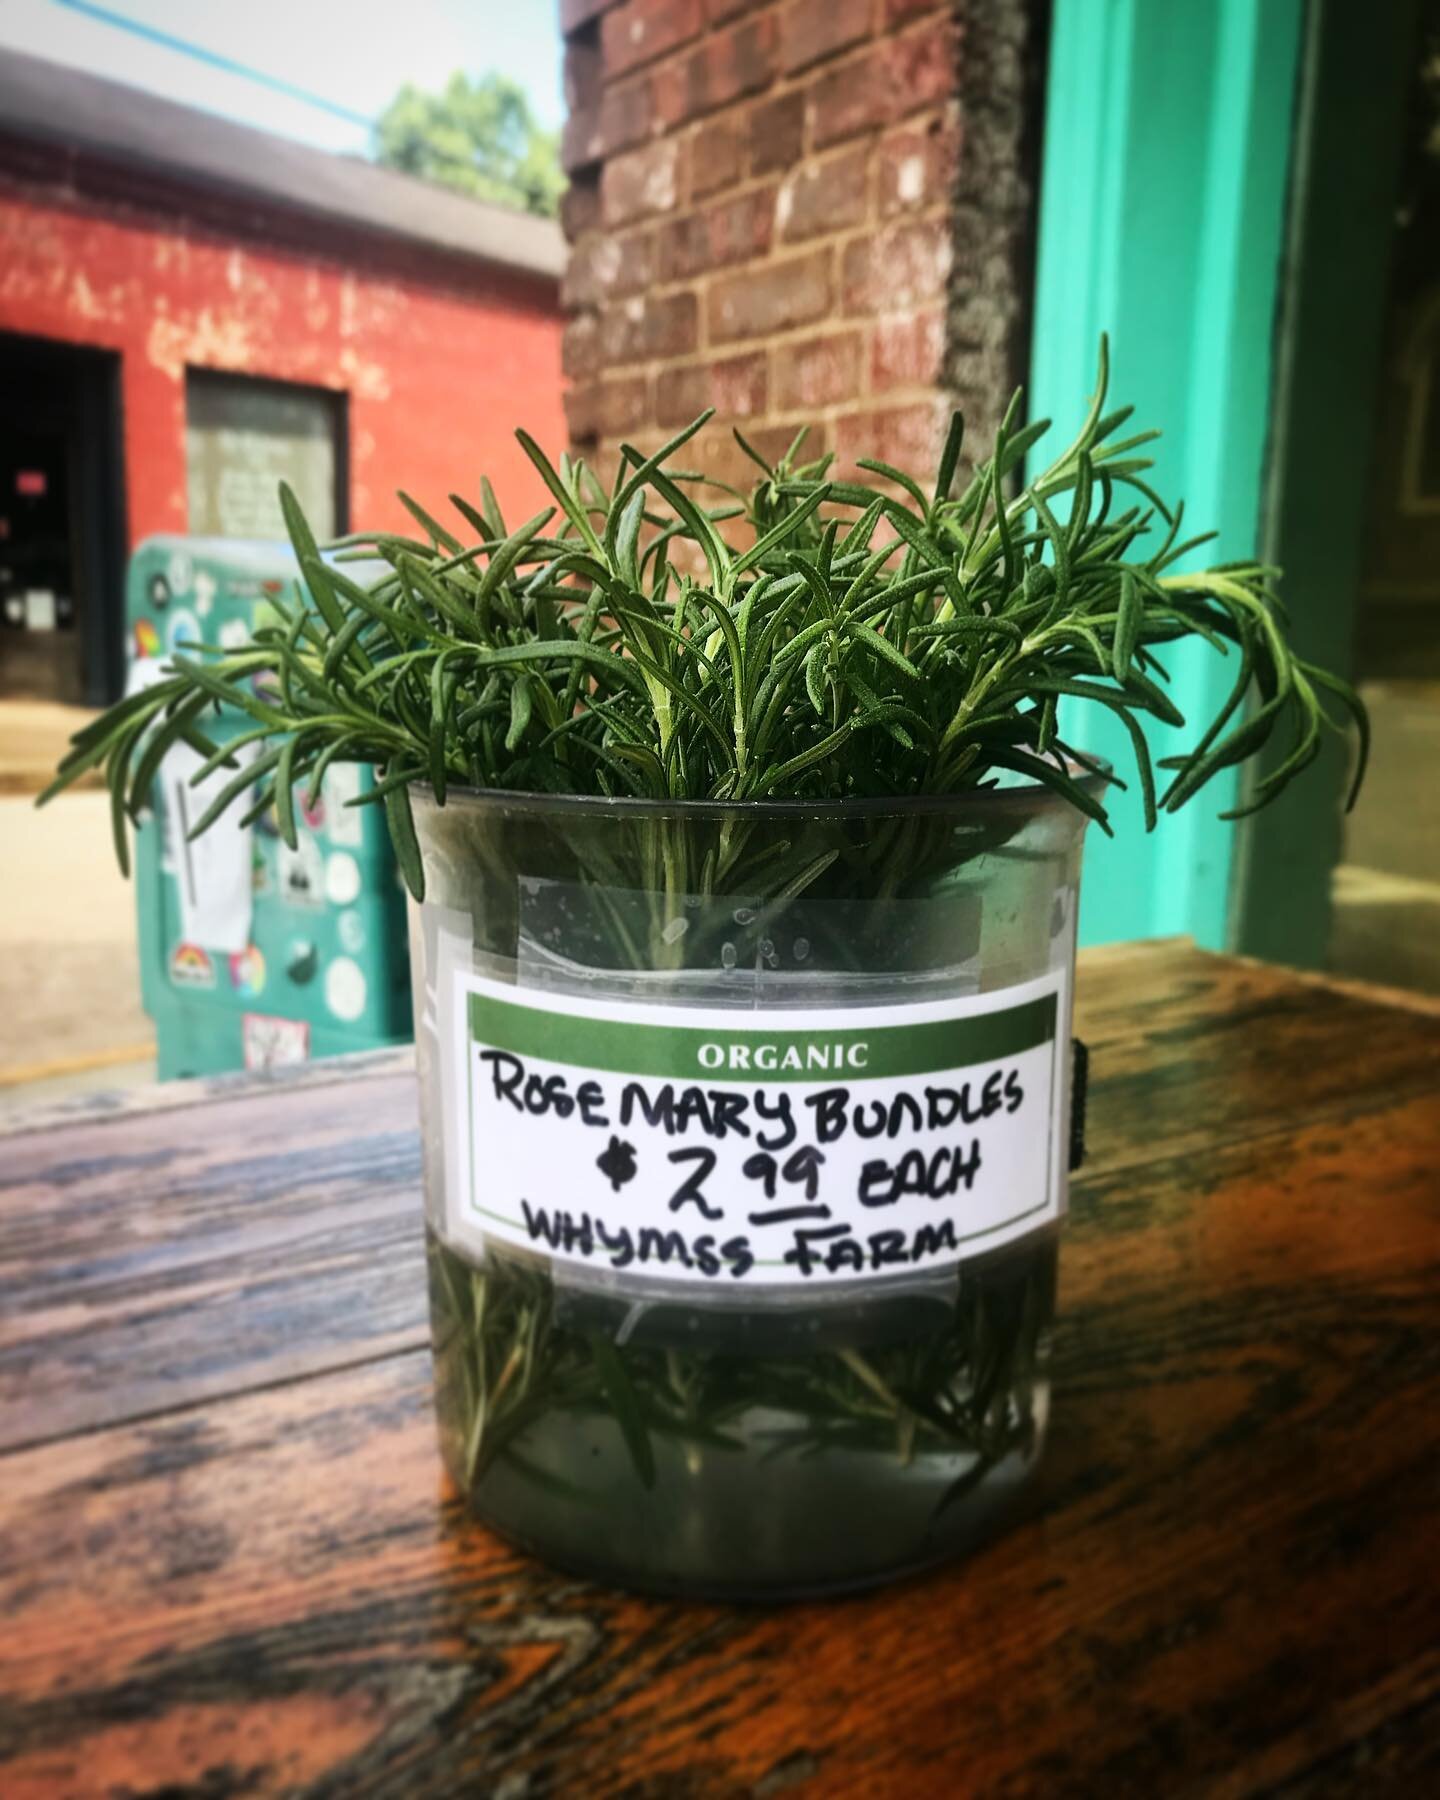 Lovely rosemary bundles from Whymss Farm!🪴
#supportlocal #eatdaily #rosemary